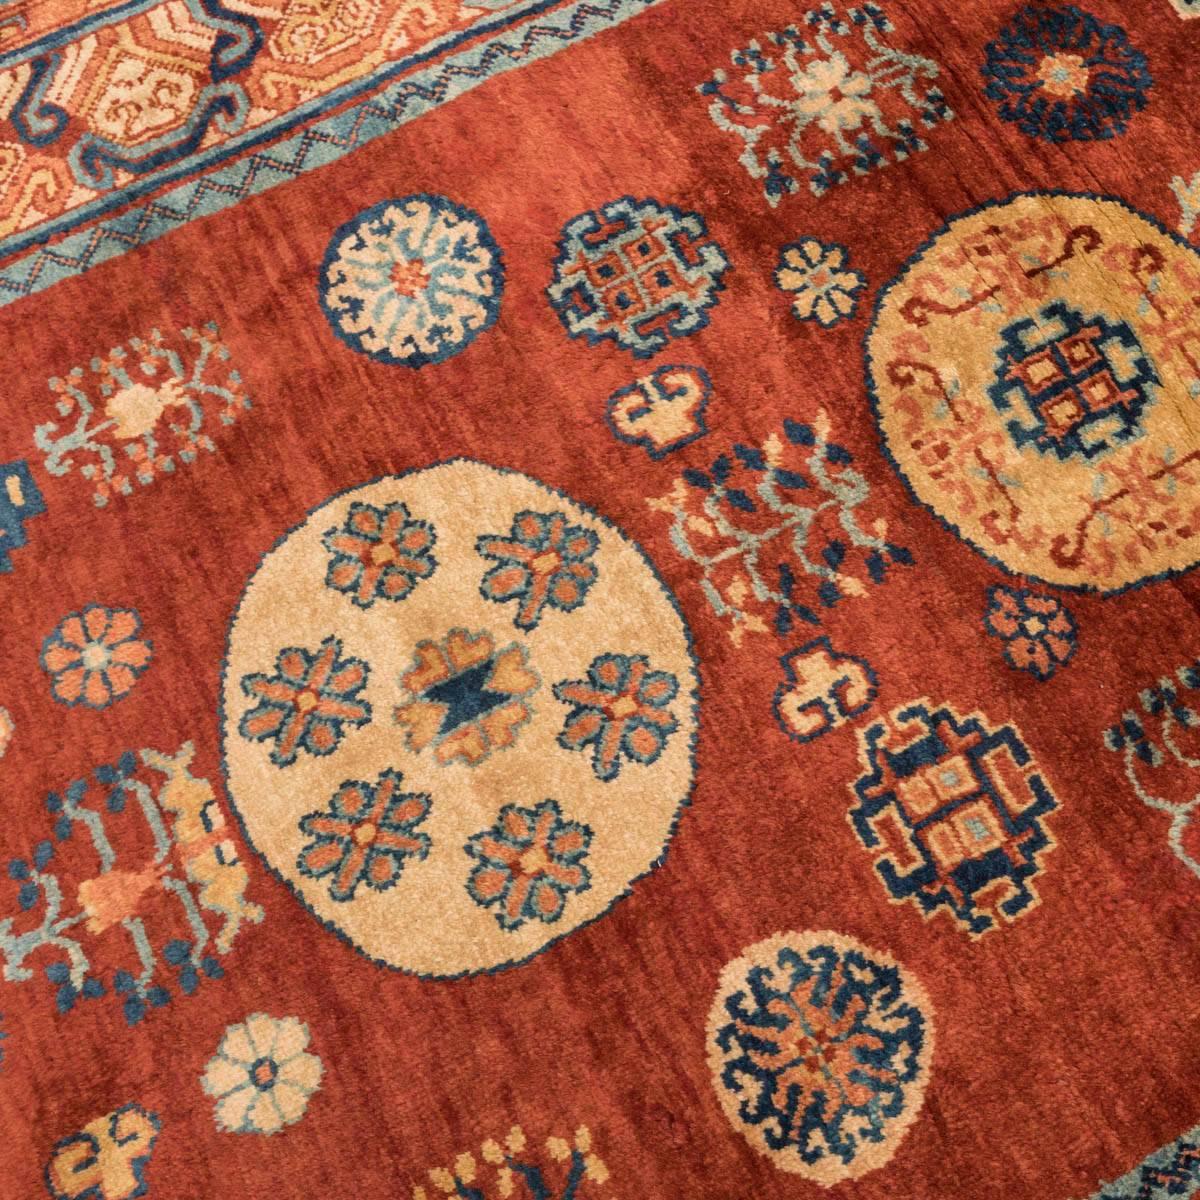 Hand-Knotted 20th Century Samarkand Wool Caramel Color Rug Kothan Design circa 1900. For Sale